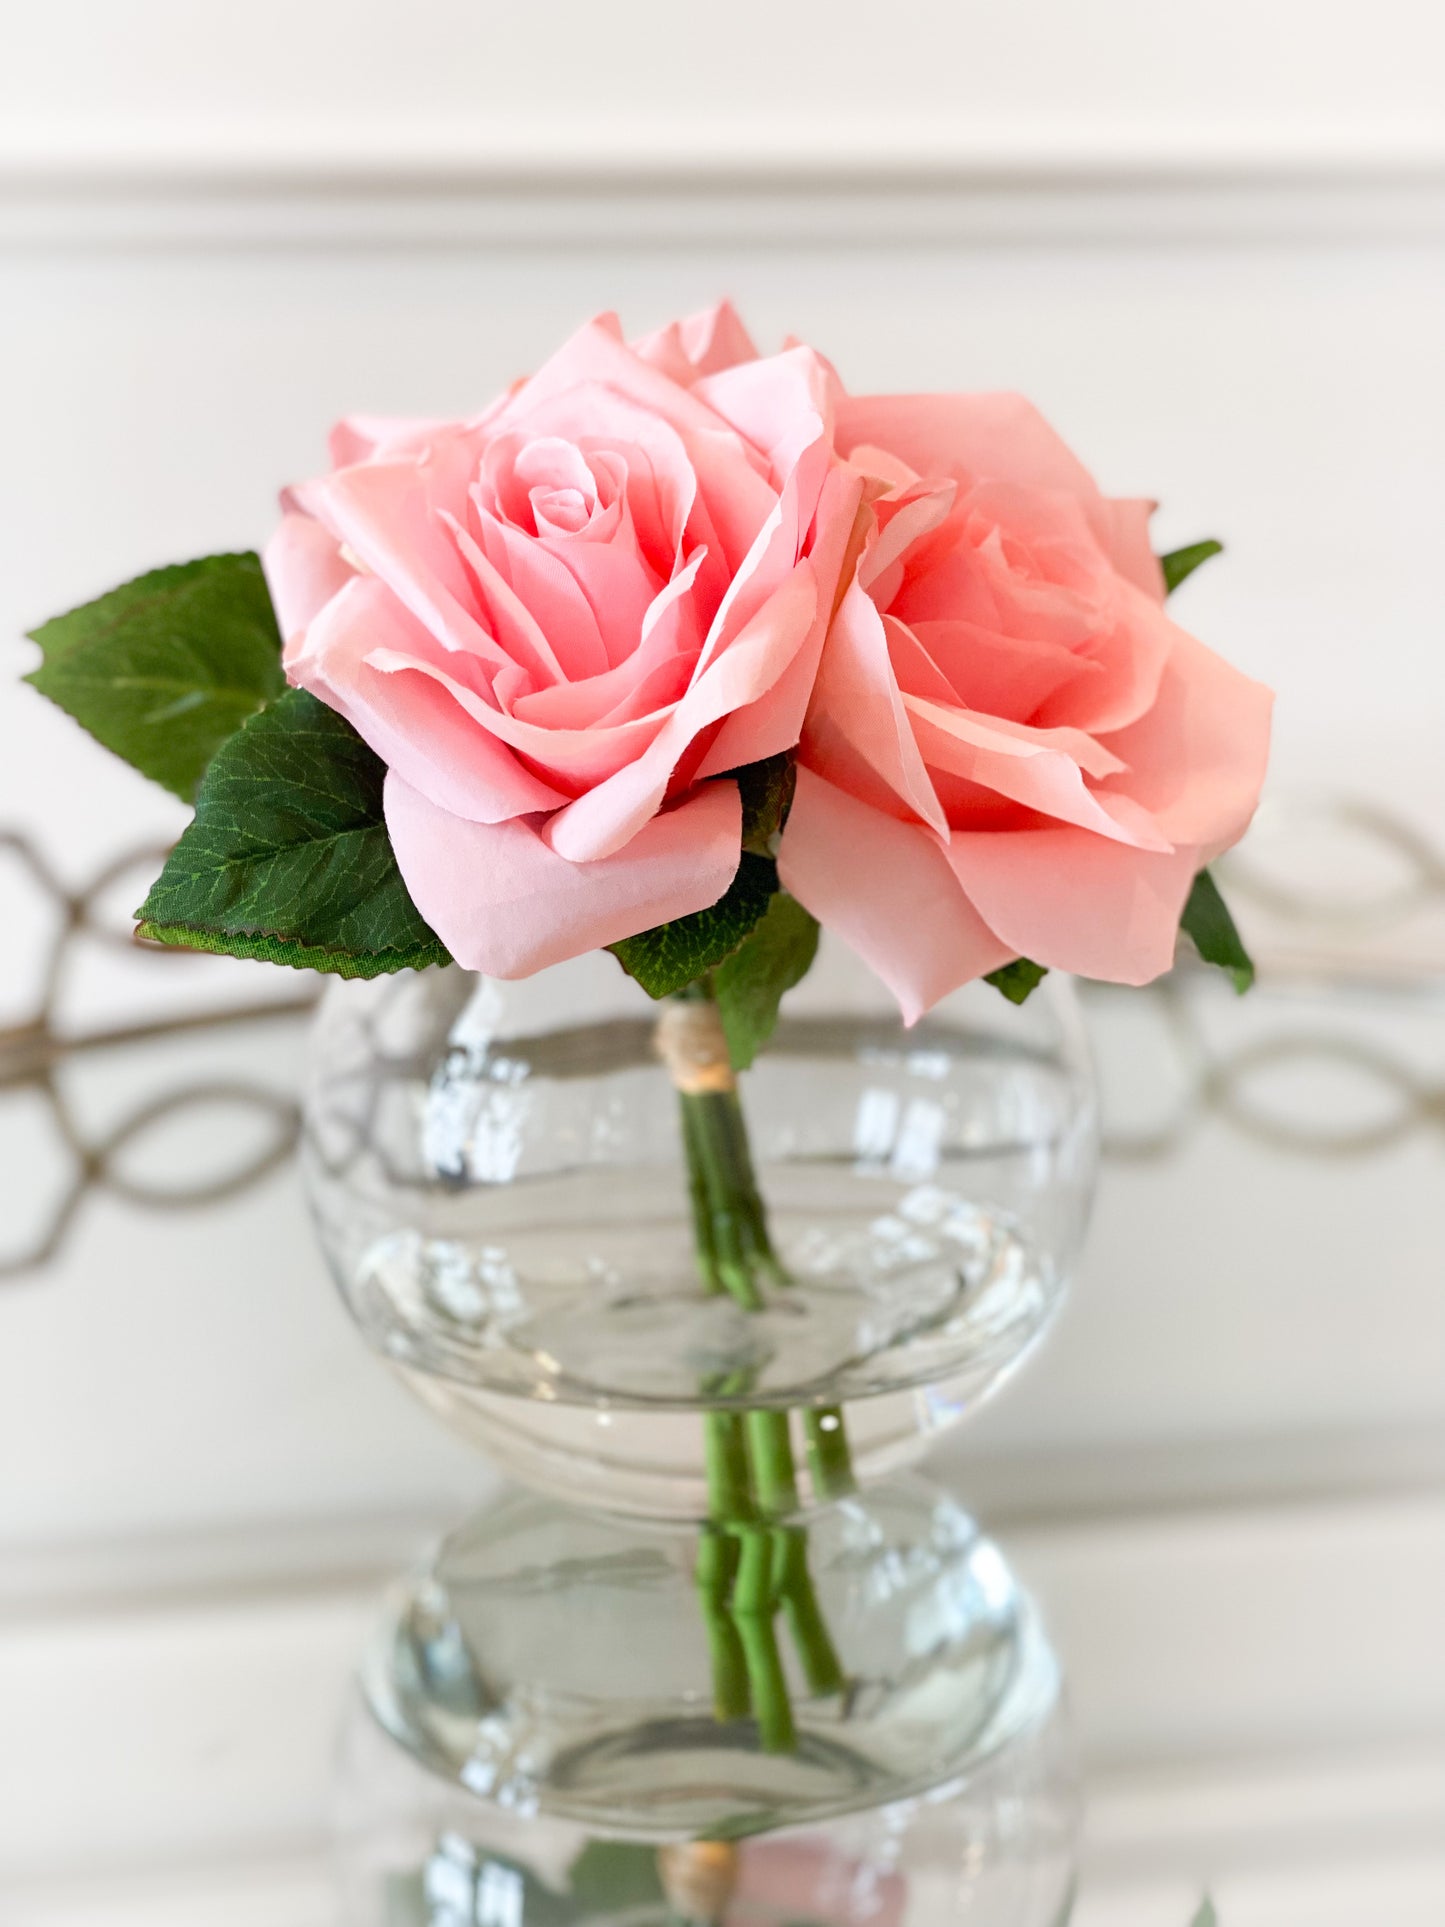 Pink Rose Trio In Glass Vase With Acrylic Water